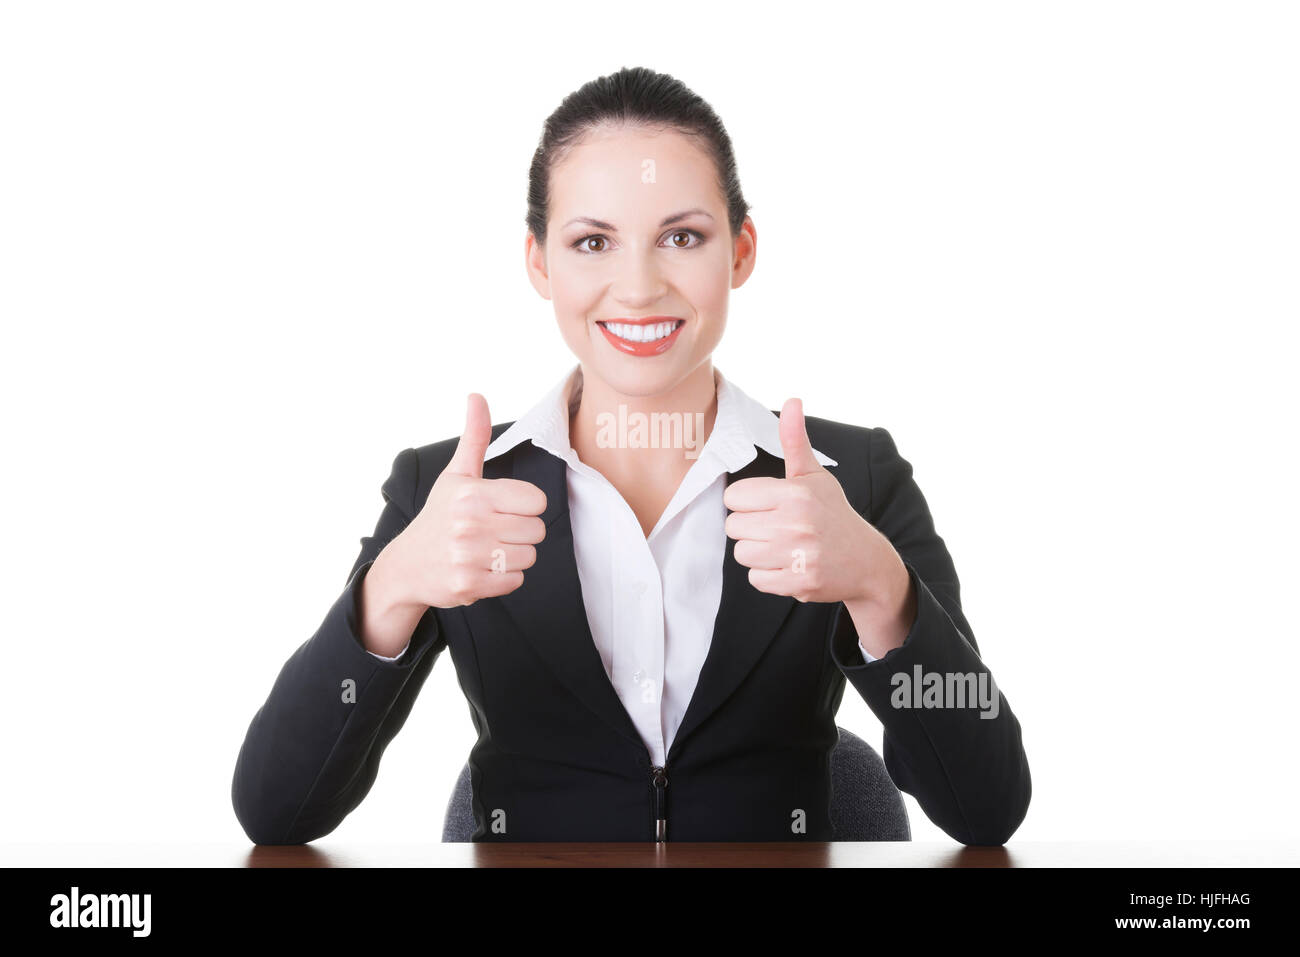 woman, humans, human beings, people, folk, persons, human, human being, office, Stock Photo